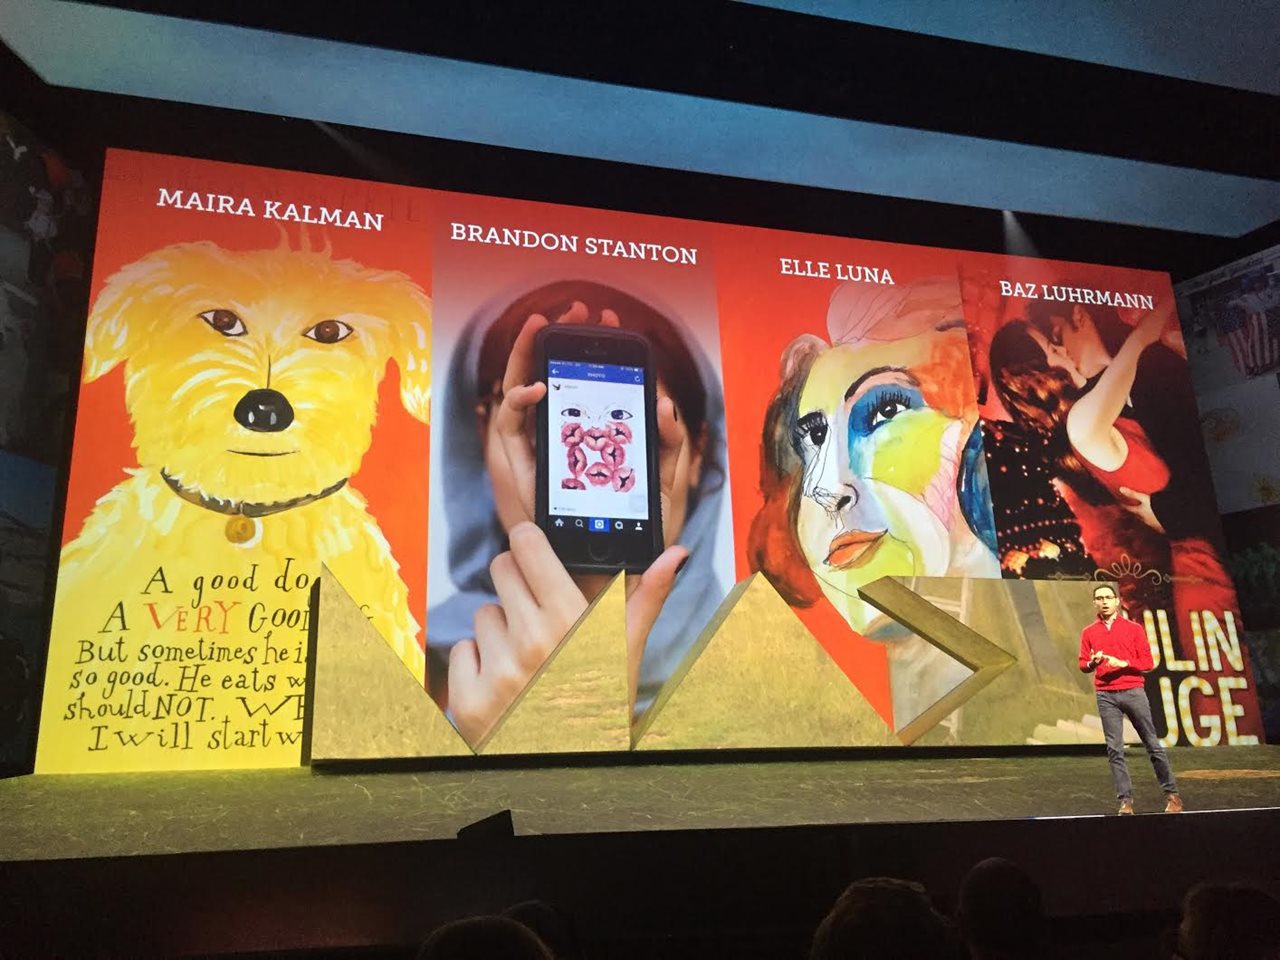 A Rhythmite Reports From The AdobeMAX Conference